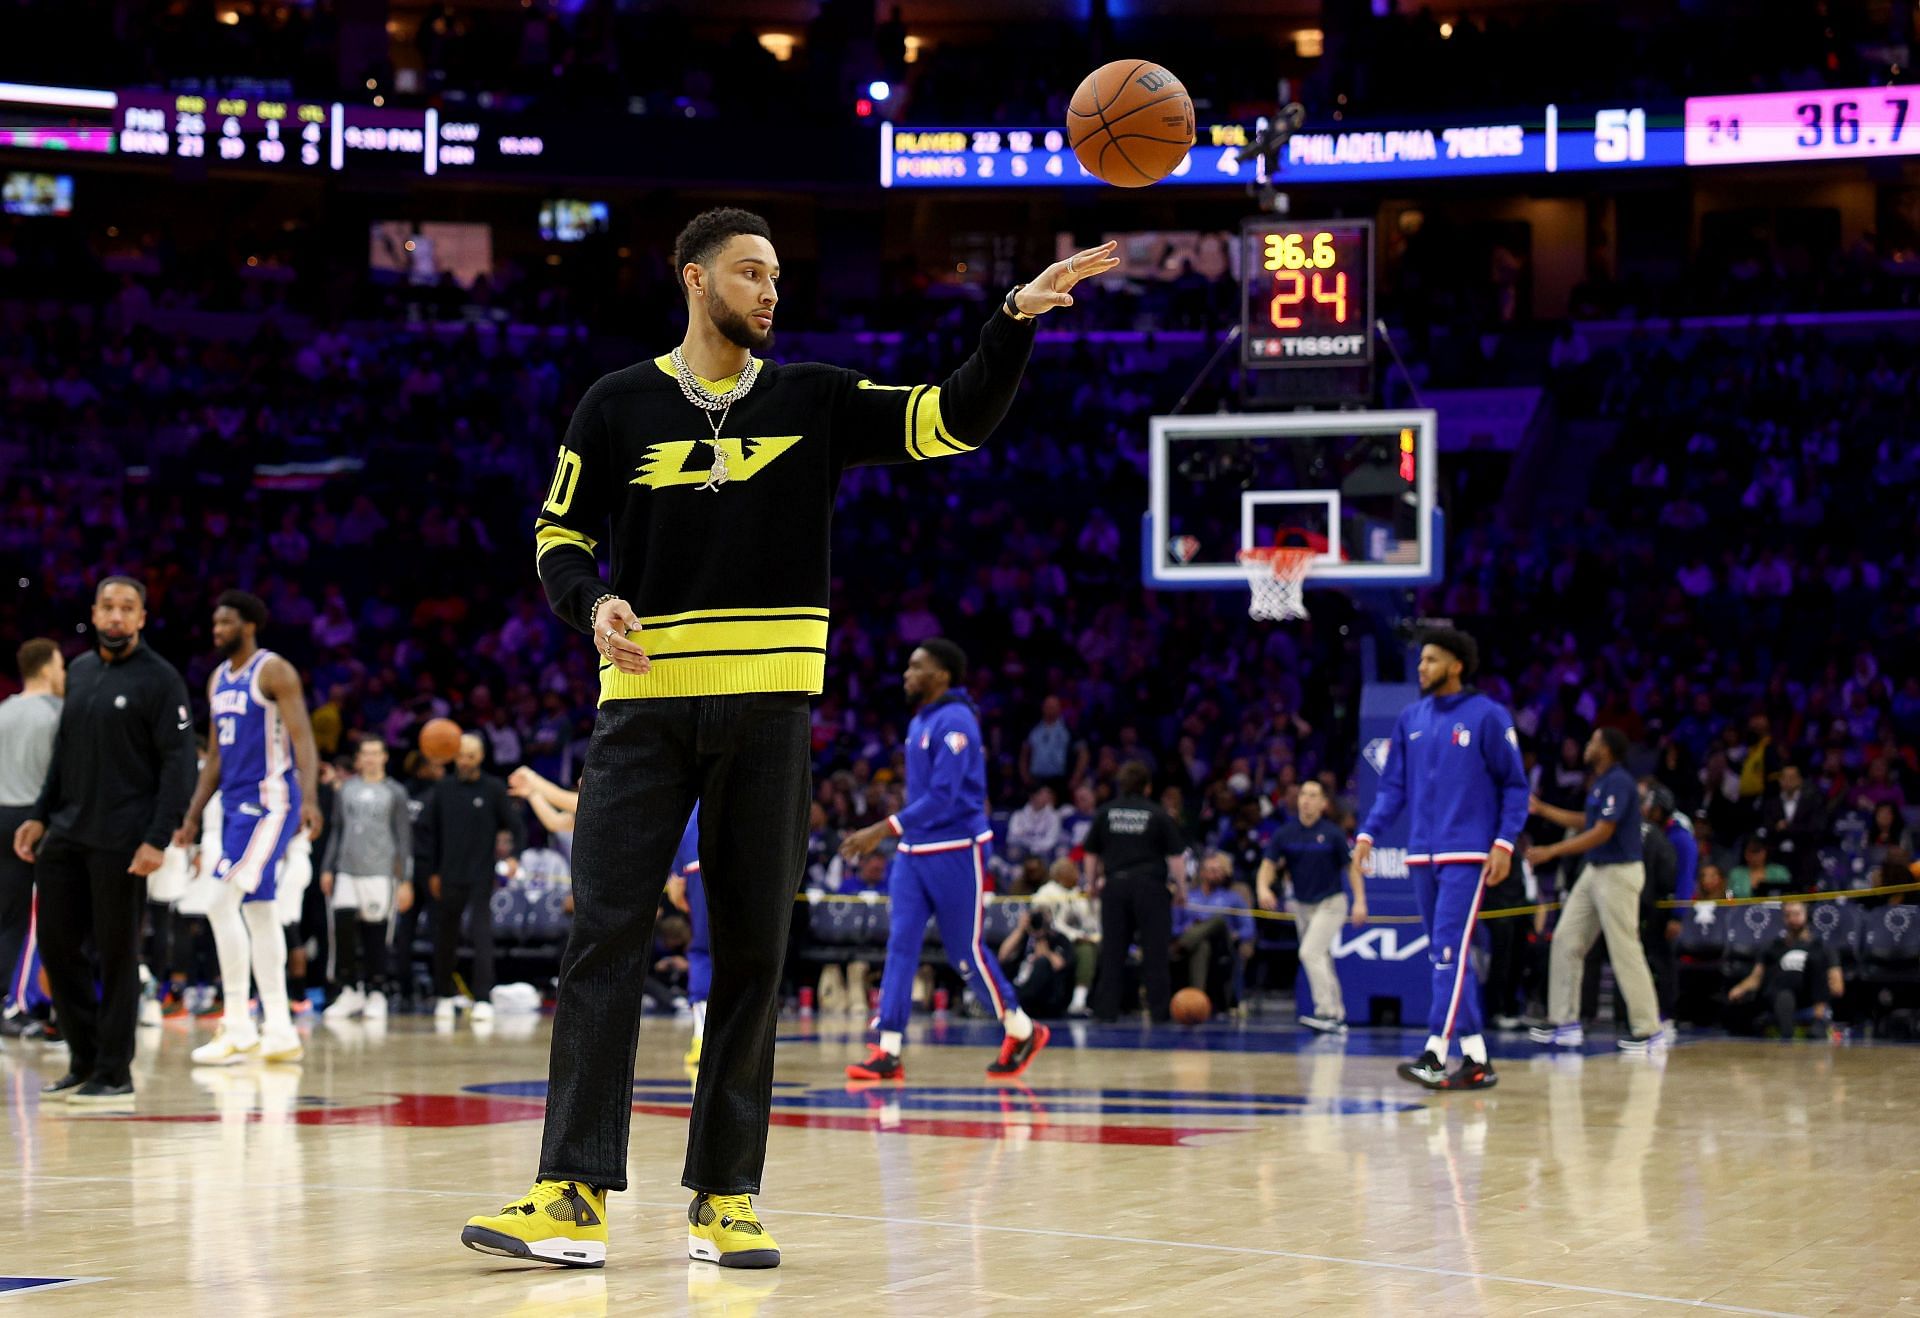 Ben Simmons #10 of the Brooklyn Nets walks on the court during halftime against the Philadelphia 76ers at Wells Fargo Center on March 10, 2022 in Philadelphia, Pennsylvania. The Brooklyn Nets defeated the Philadelphia 76ers 129-100